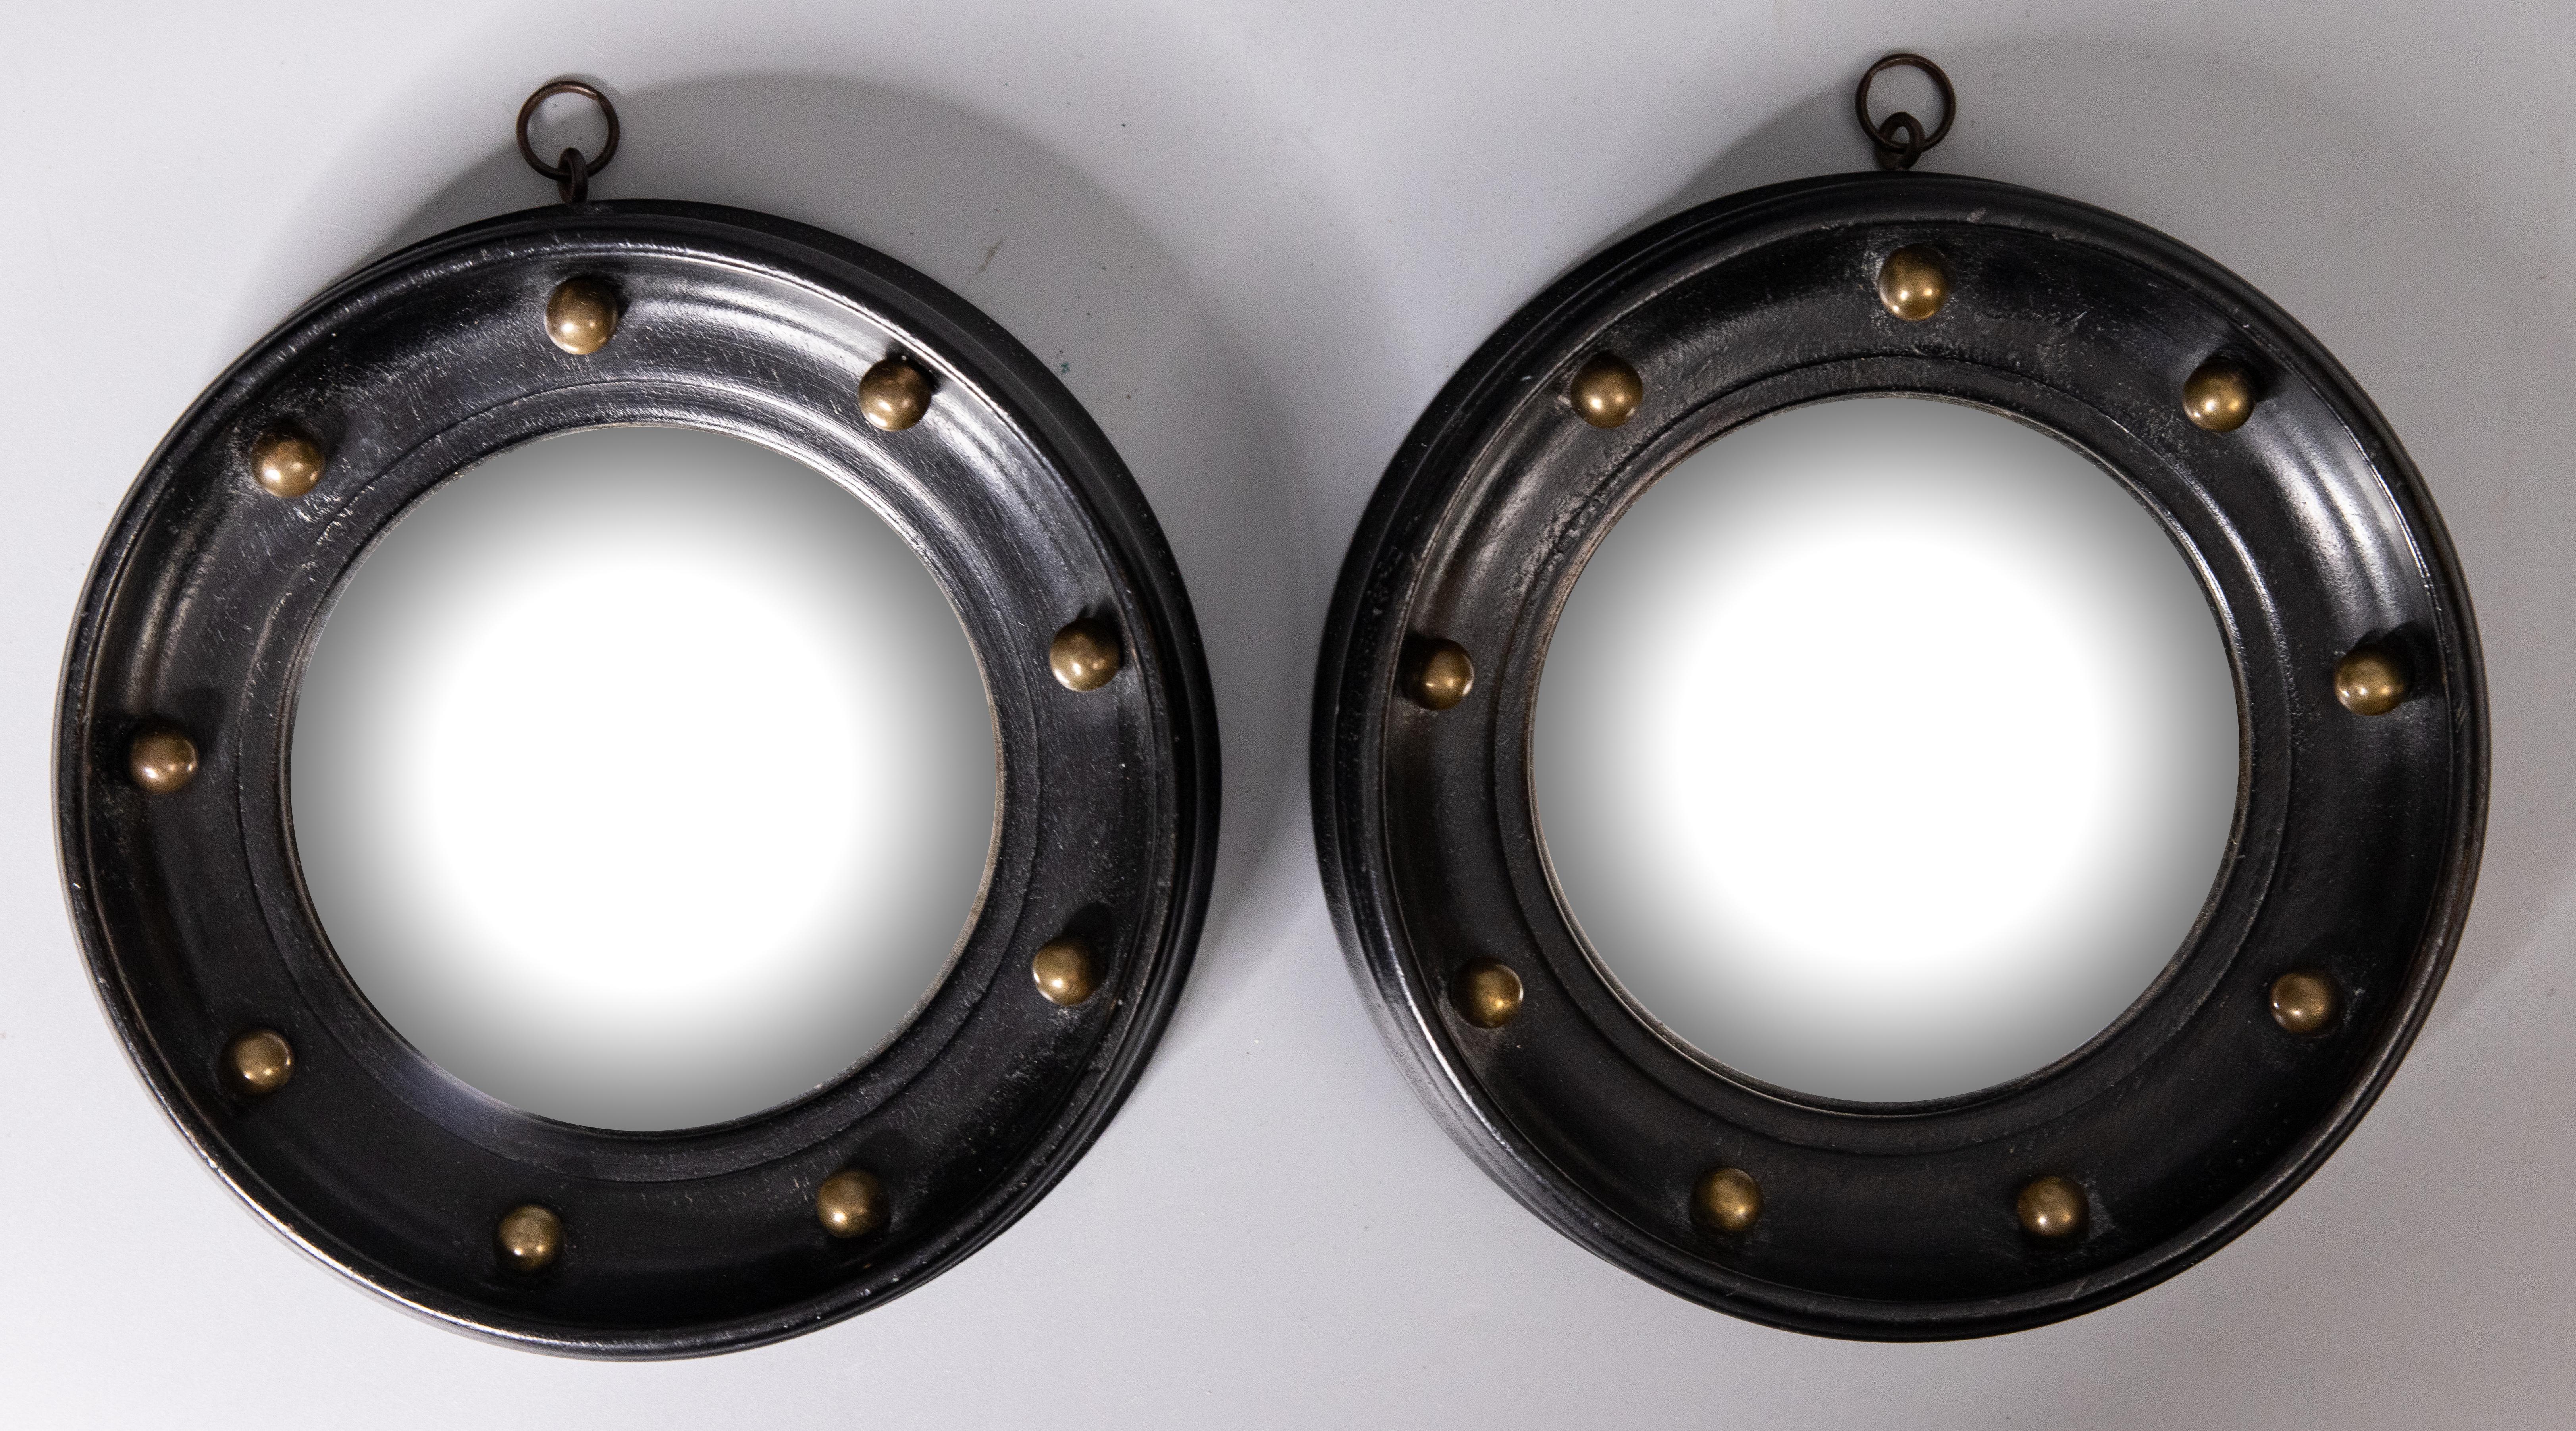 A superb pair of early Regency style black ebonized bullseye convex mirrors from England, circa 1910. These stunning mirrors are a charming petite size and retain the original convex mirror glass. They have turned ebonized frames accented with